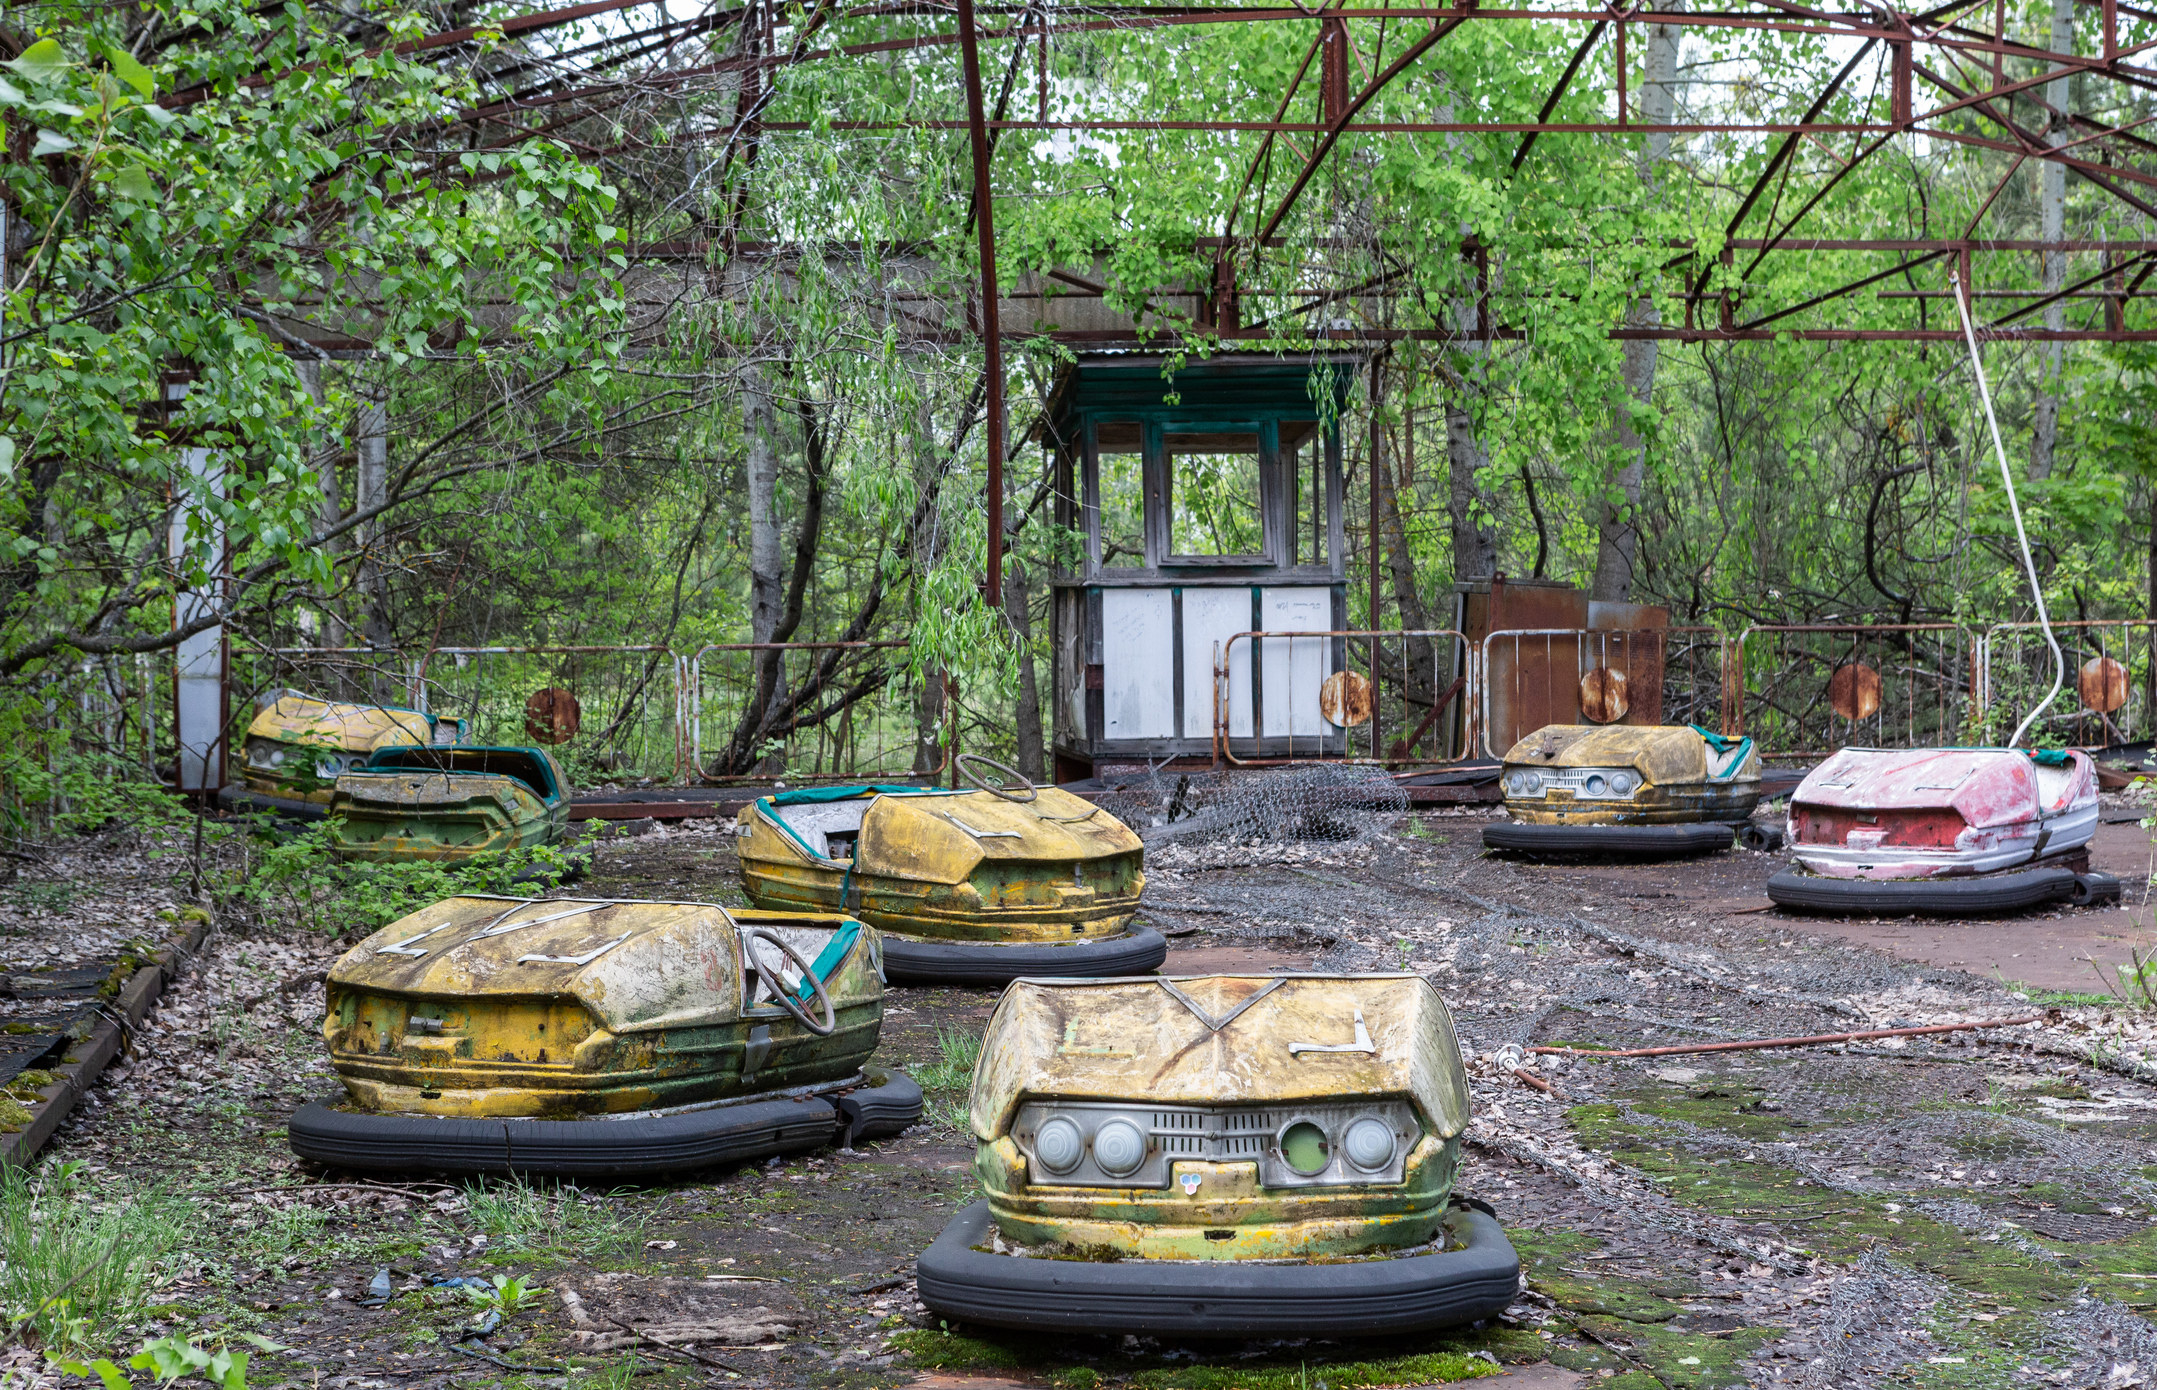 rusted bumper cars with overgrown trees growing into the area